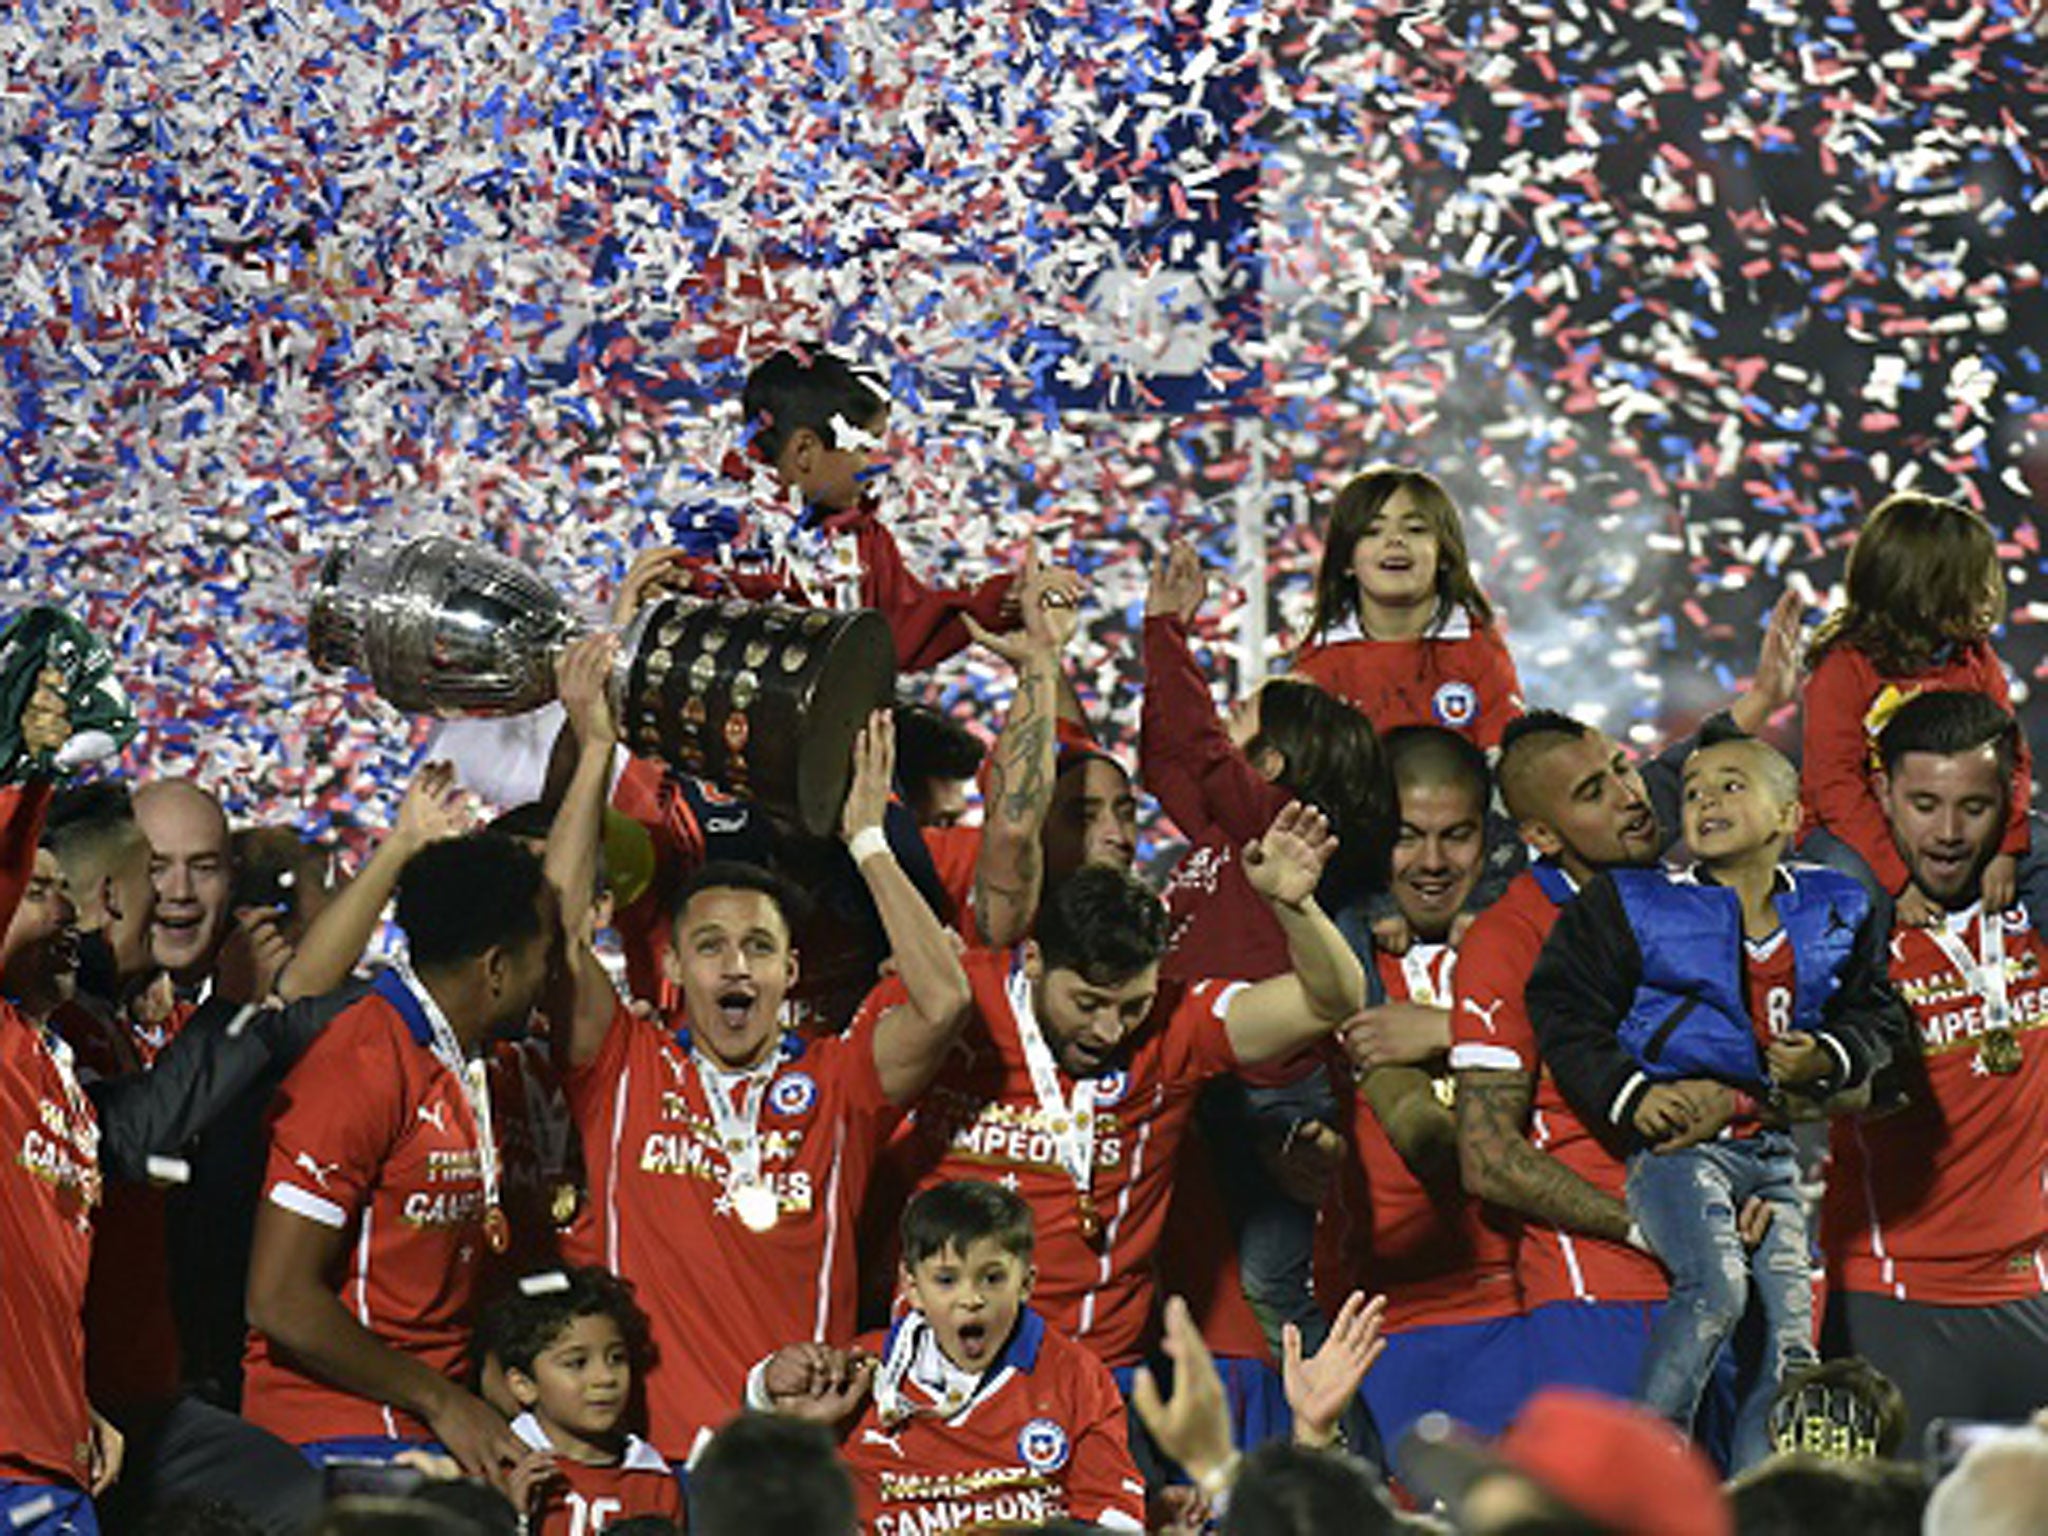 Alexis Sanchez leads Chile celebrations after their Copa America success on home soil last summer - their first victory in the tournament (Getty)